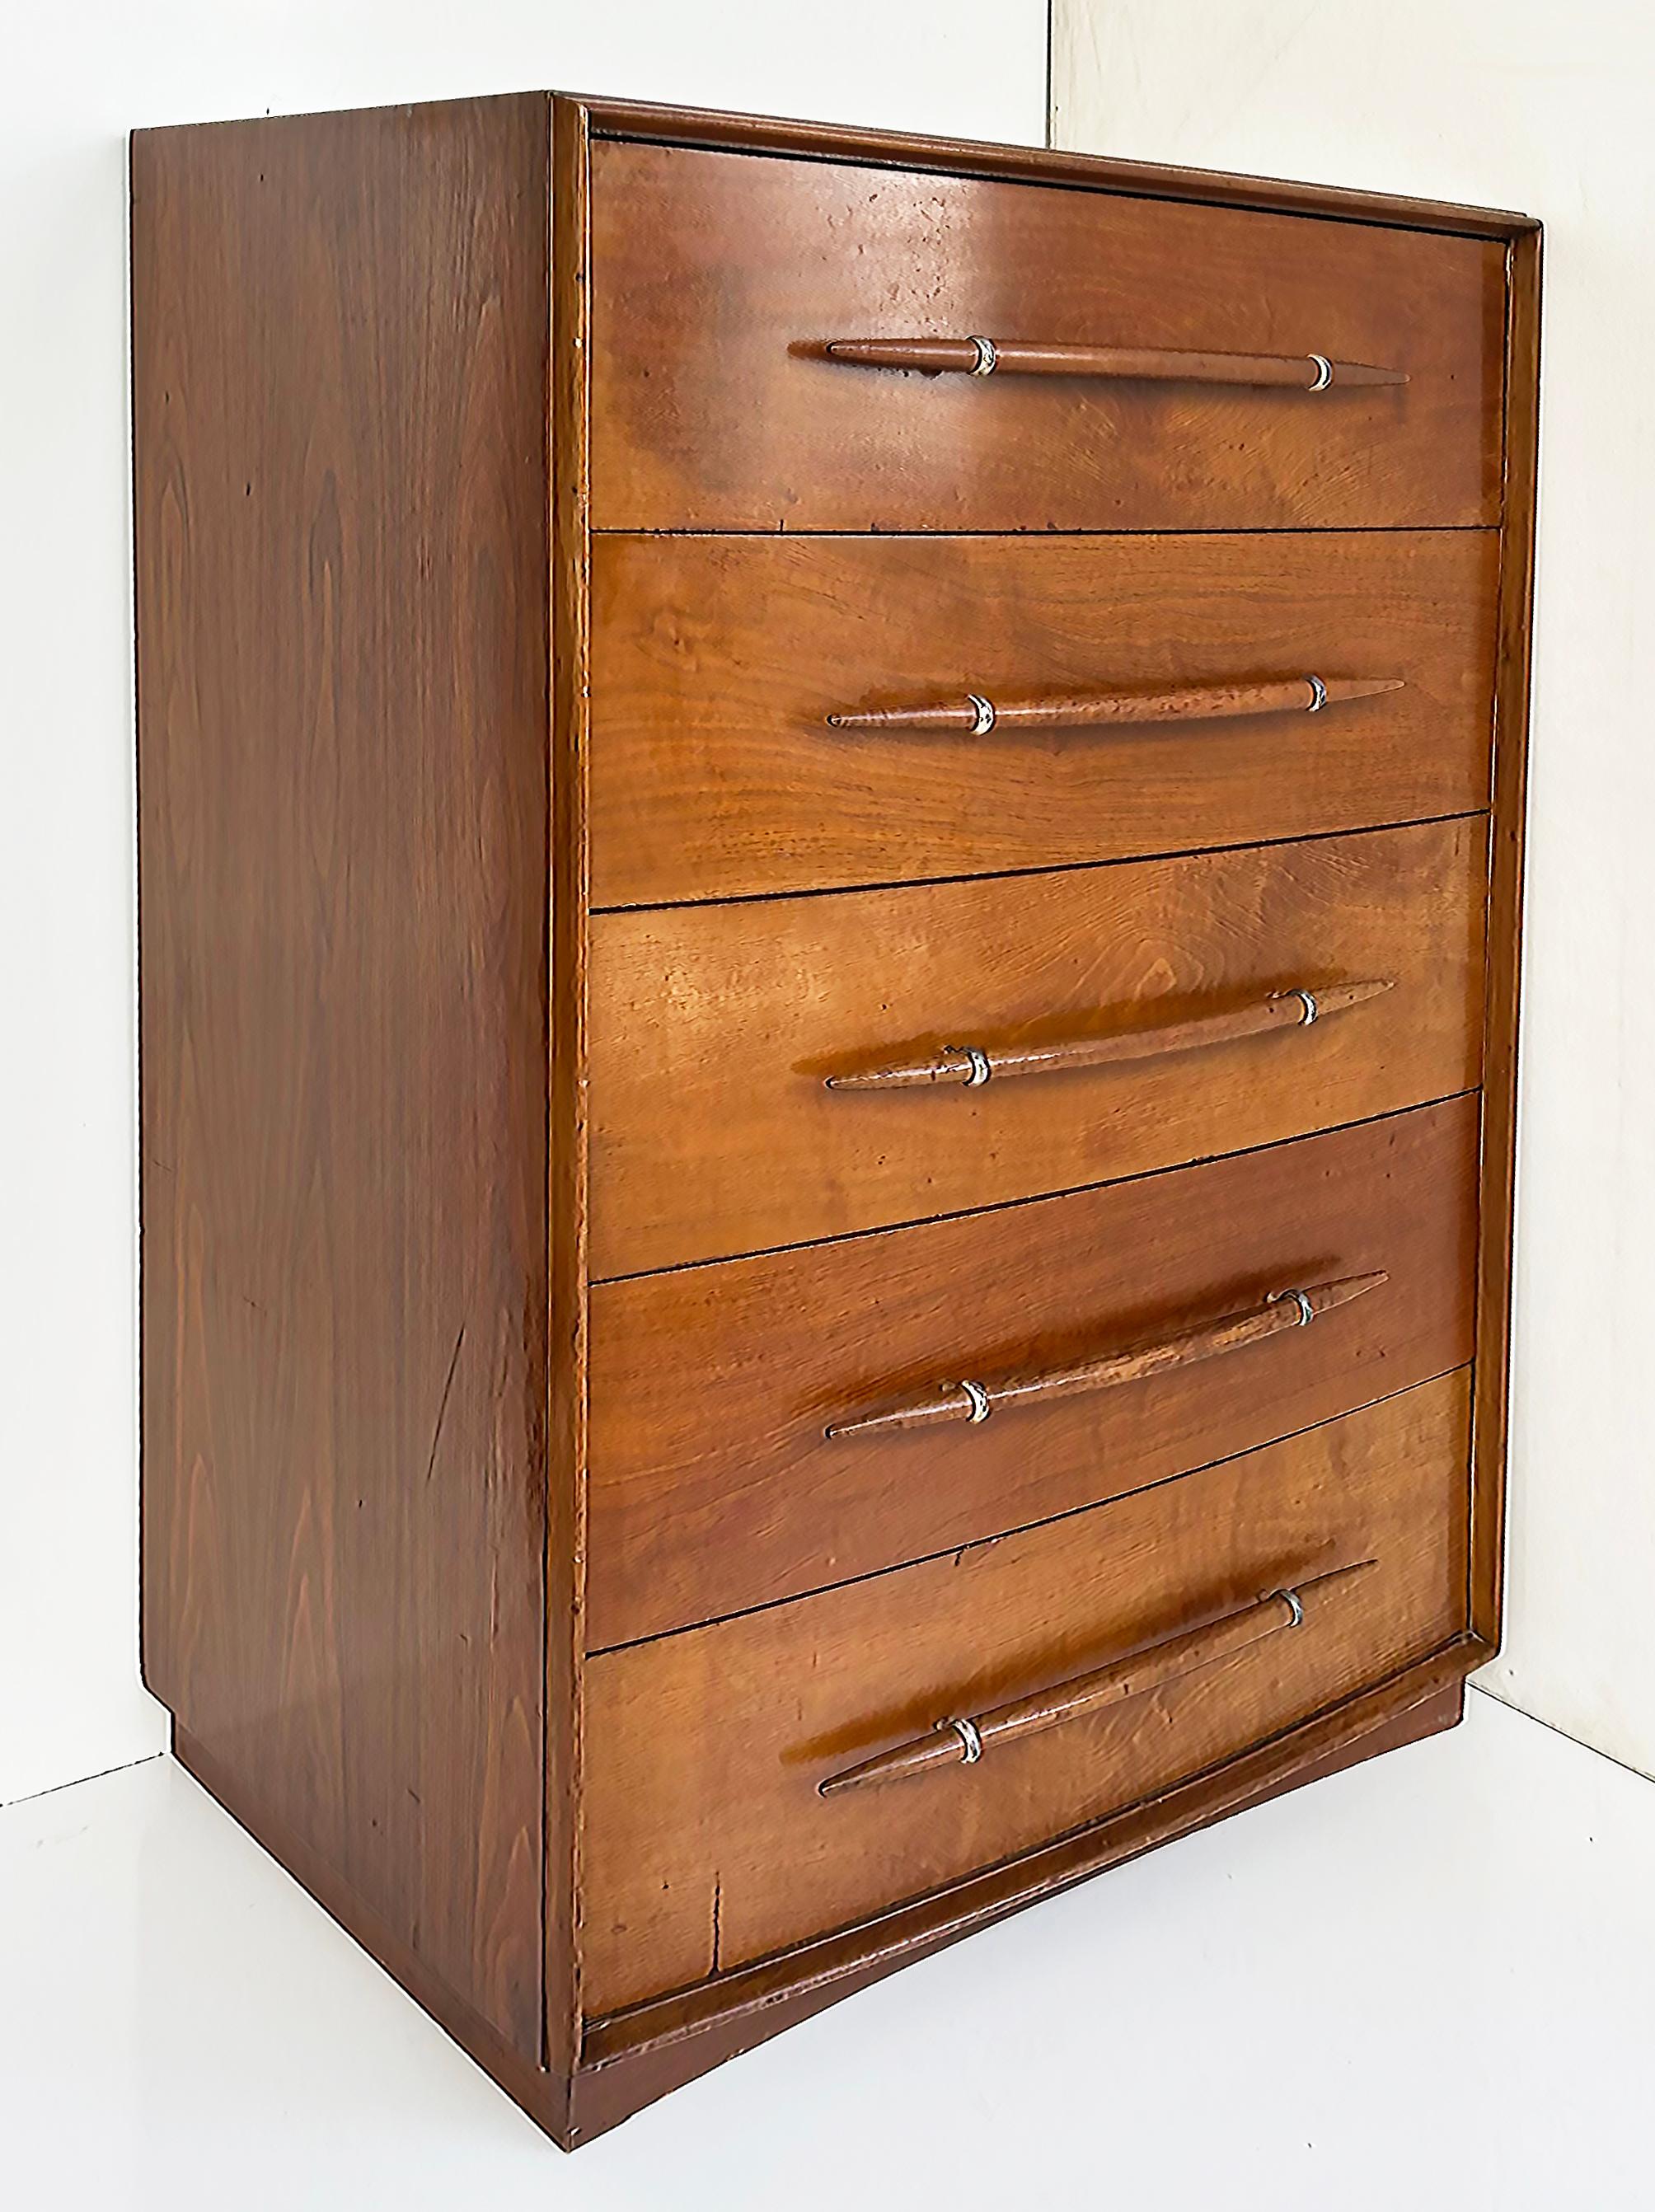 T.H. Robsjohn-Gibbings Widdicomb Tall Walnut Dresser with Spear-Shaped Handles

Offered for sale is a T.H. Robsjohn-Gibbings for Widdicomb Furniture Company tall five-drawer walnut chest of drawers with stylish spear-form handles.  This chest is in